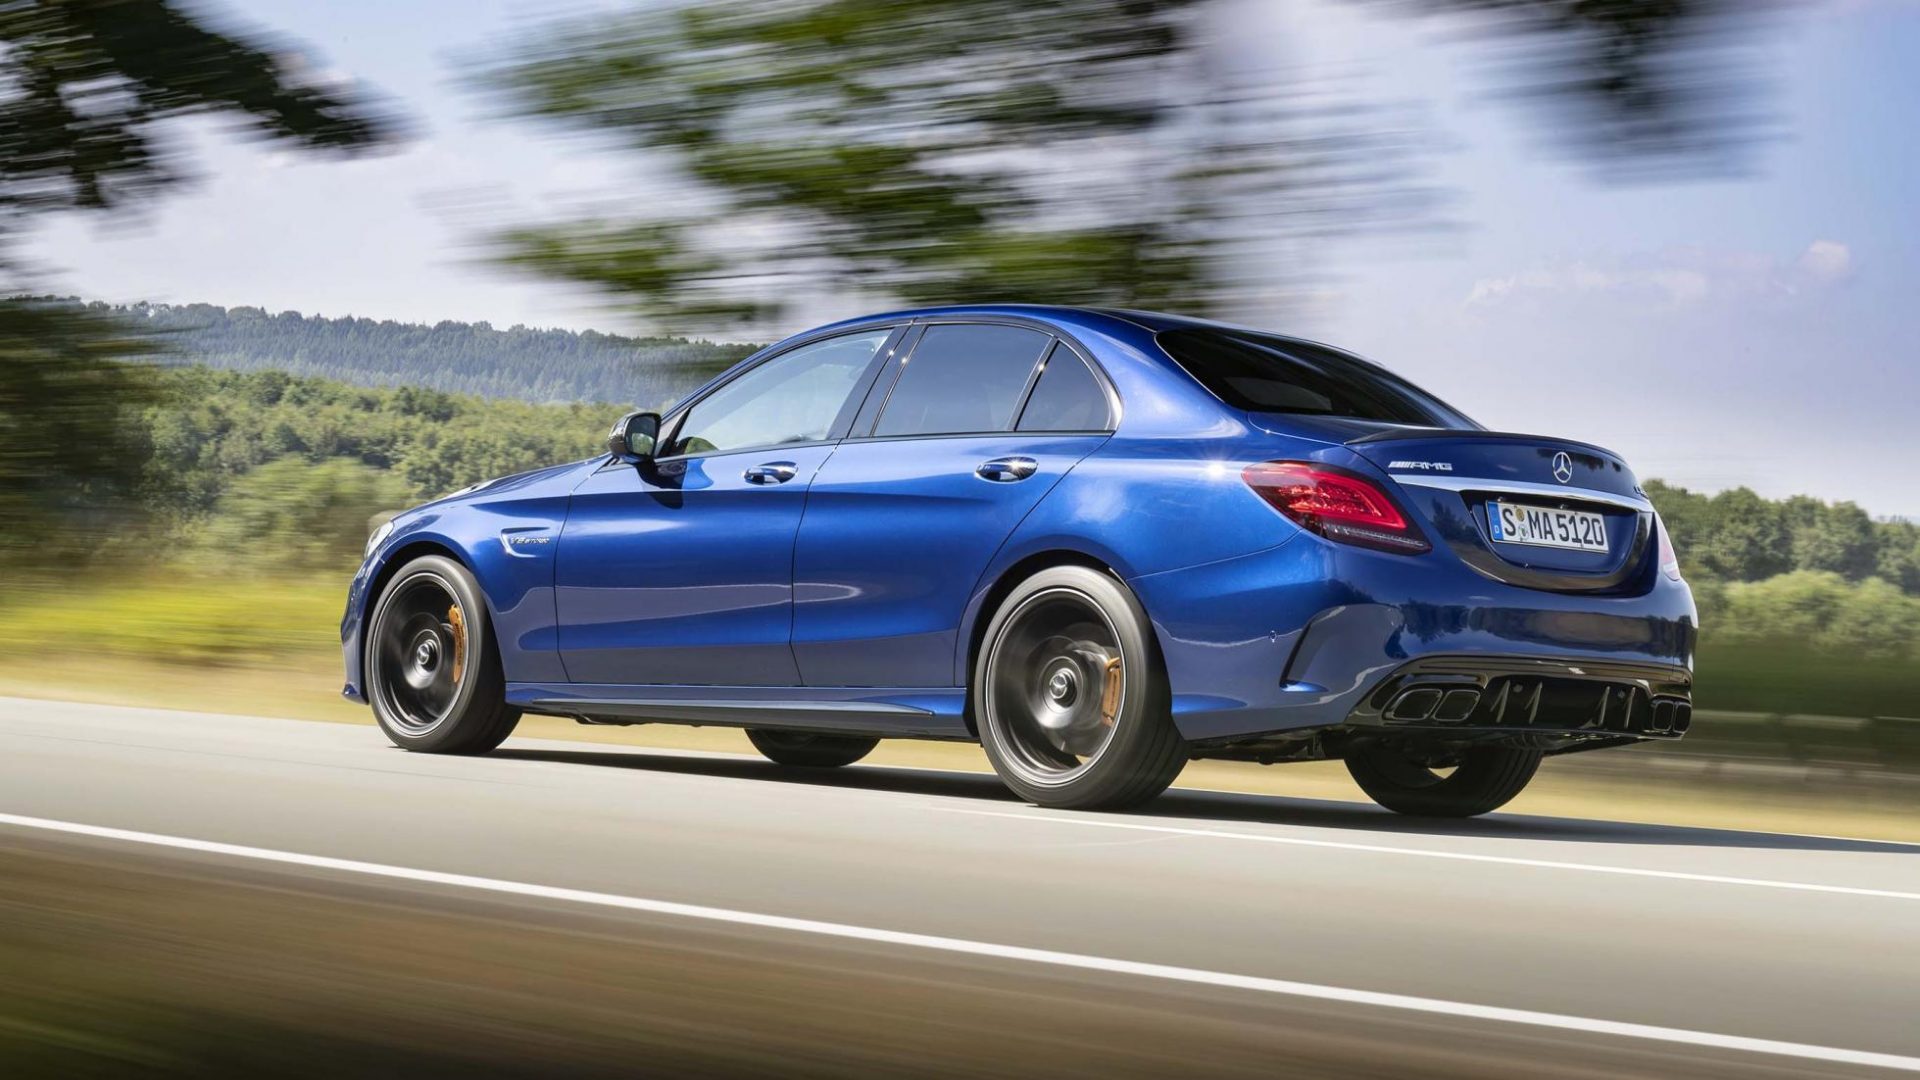 The 2020 AMG C63 S is no punk